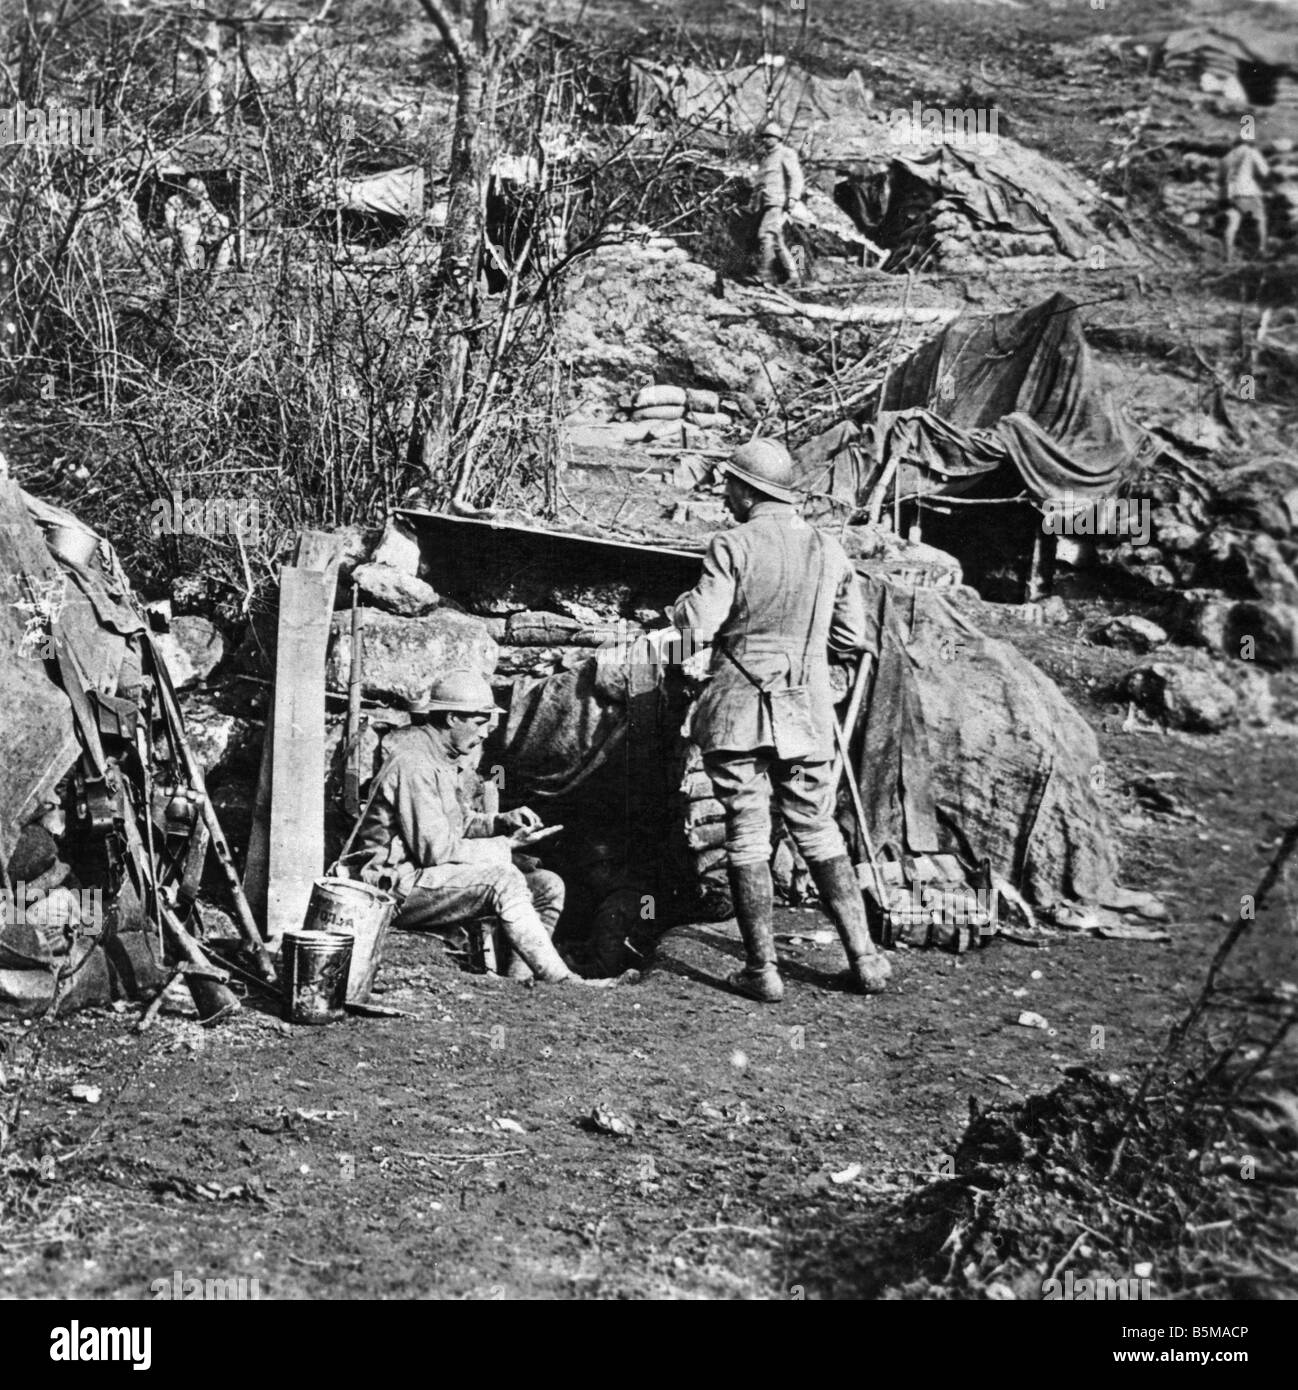 2 G55 W1 1917 12 E Western Front Trench Chemin d Dames History WWI Western Front Trench warfare Chemin des Dames Dep Aisne and r Stock Photo